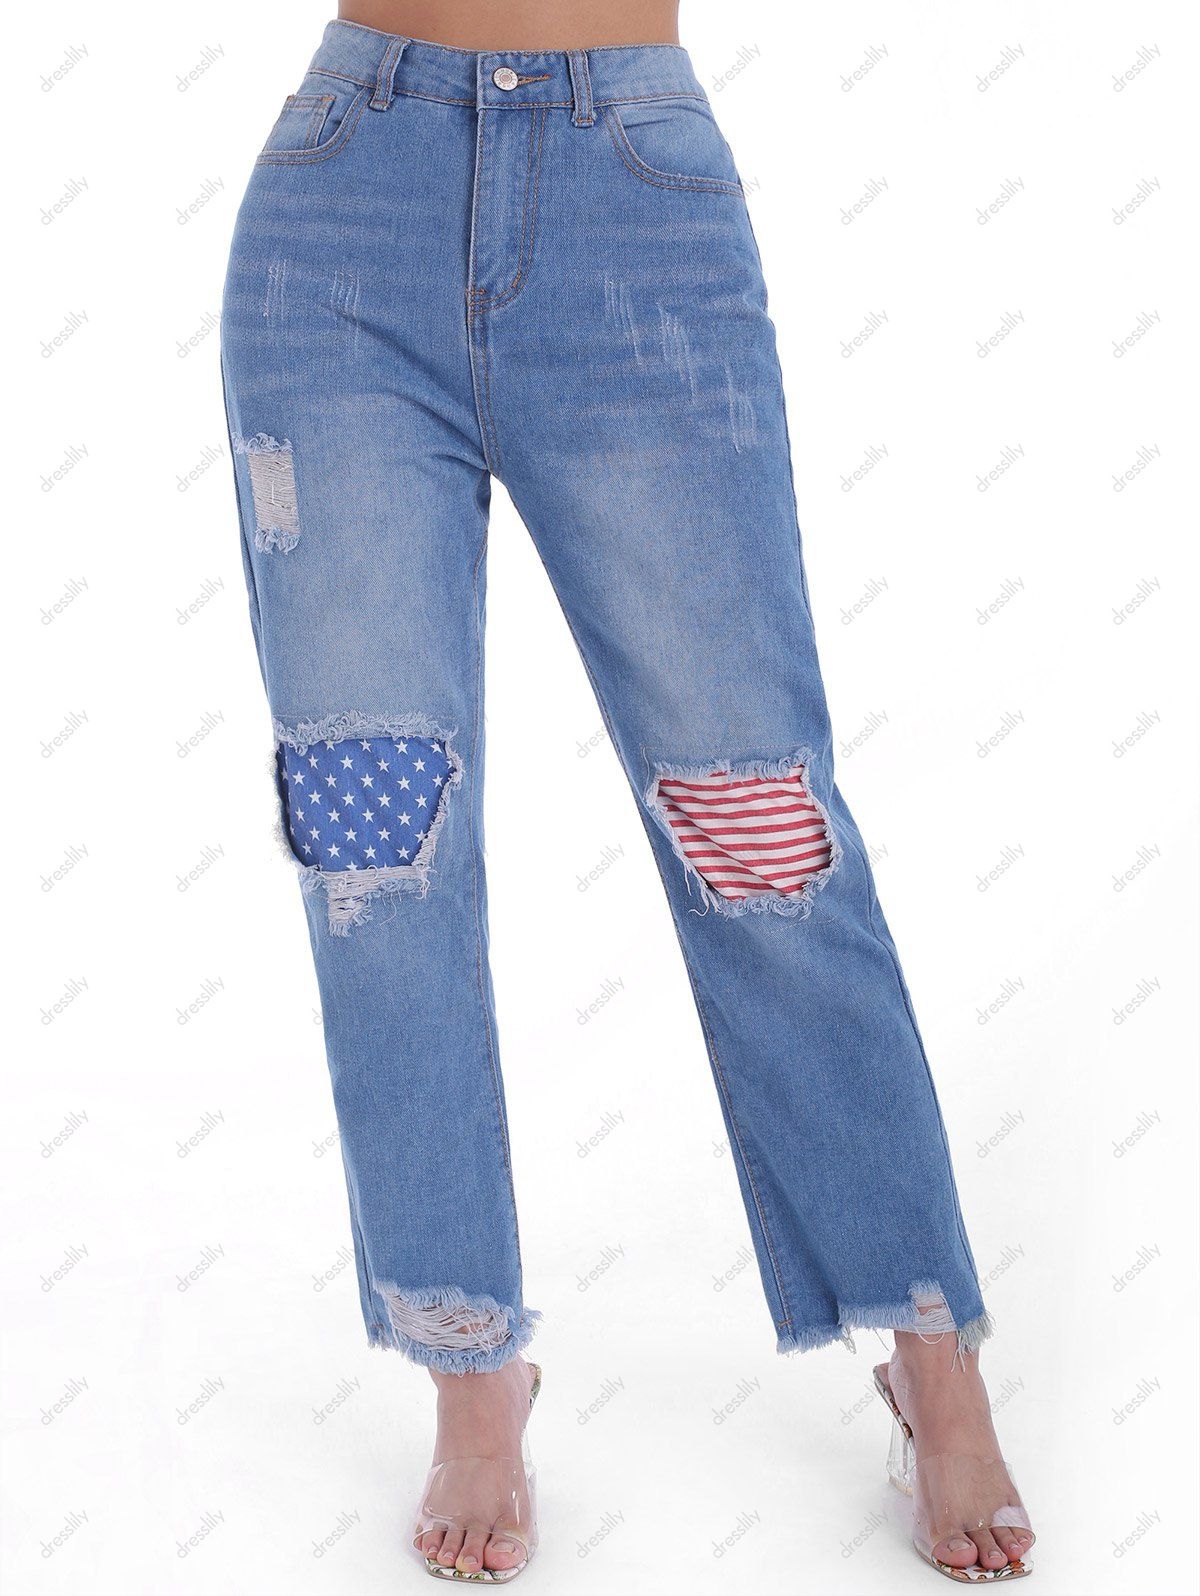 American Flag Patches Ripped Jeans Raw Hem Long Straight Distressed Denim Pants 